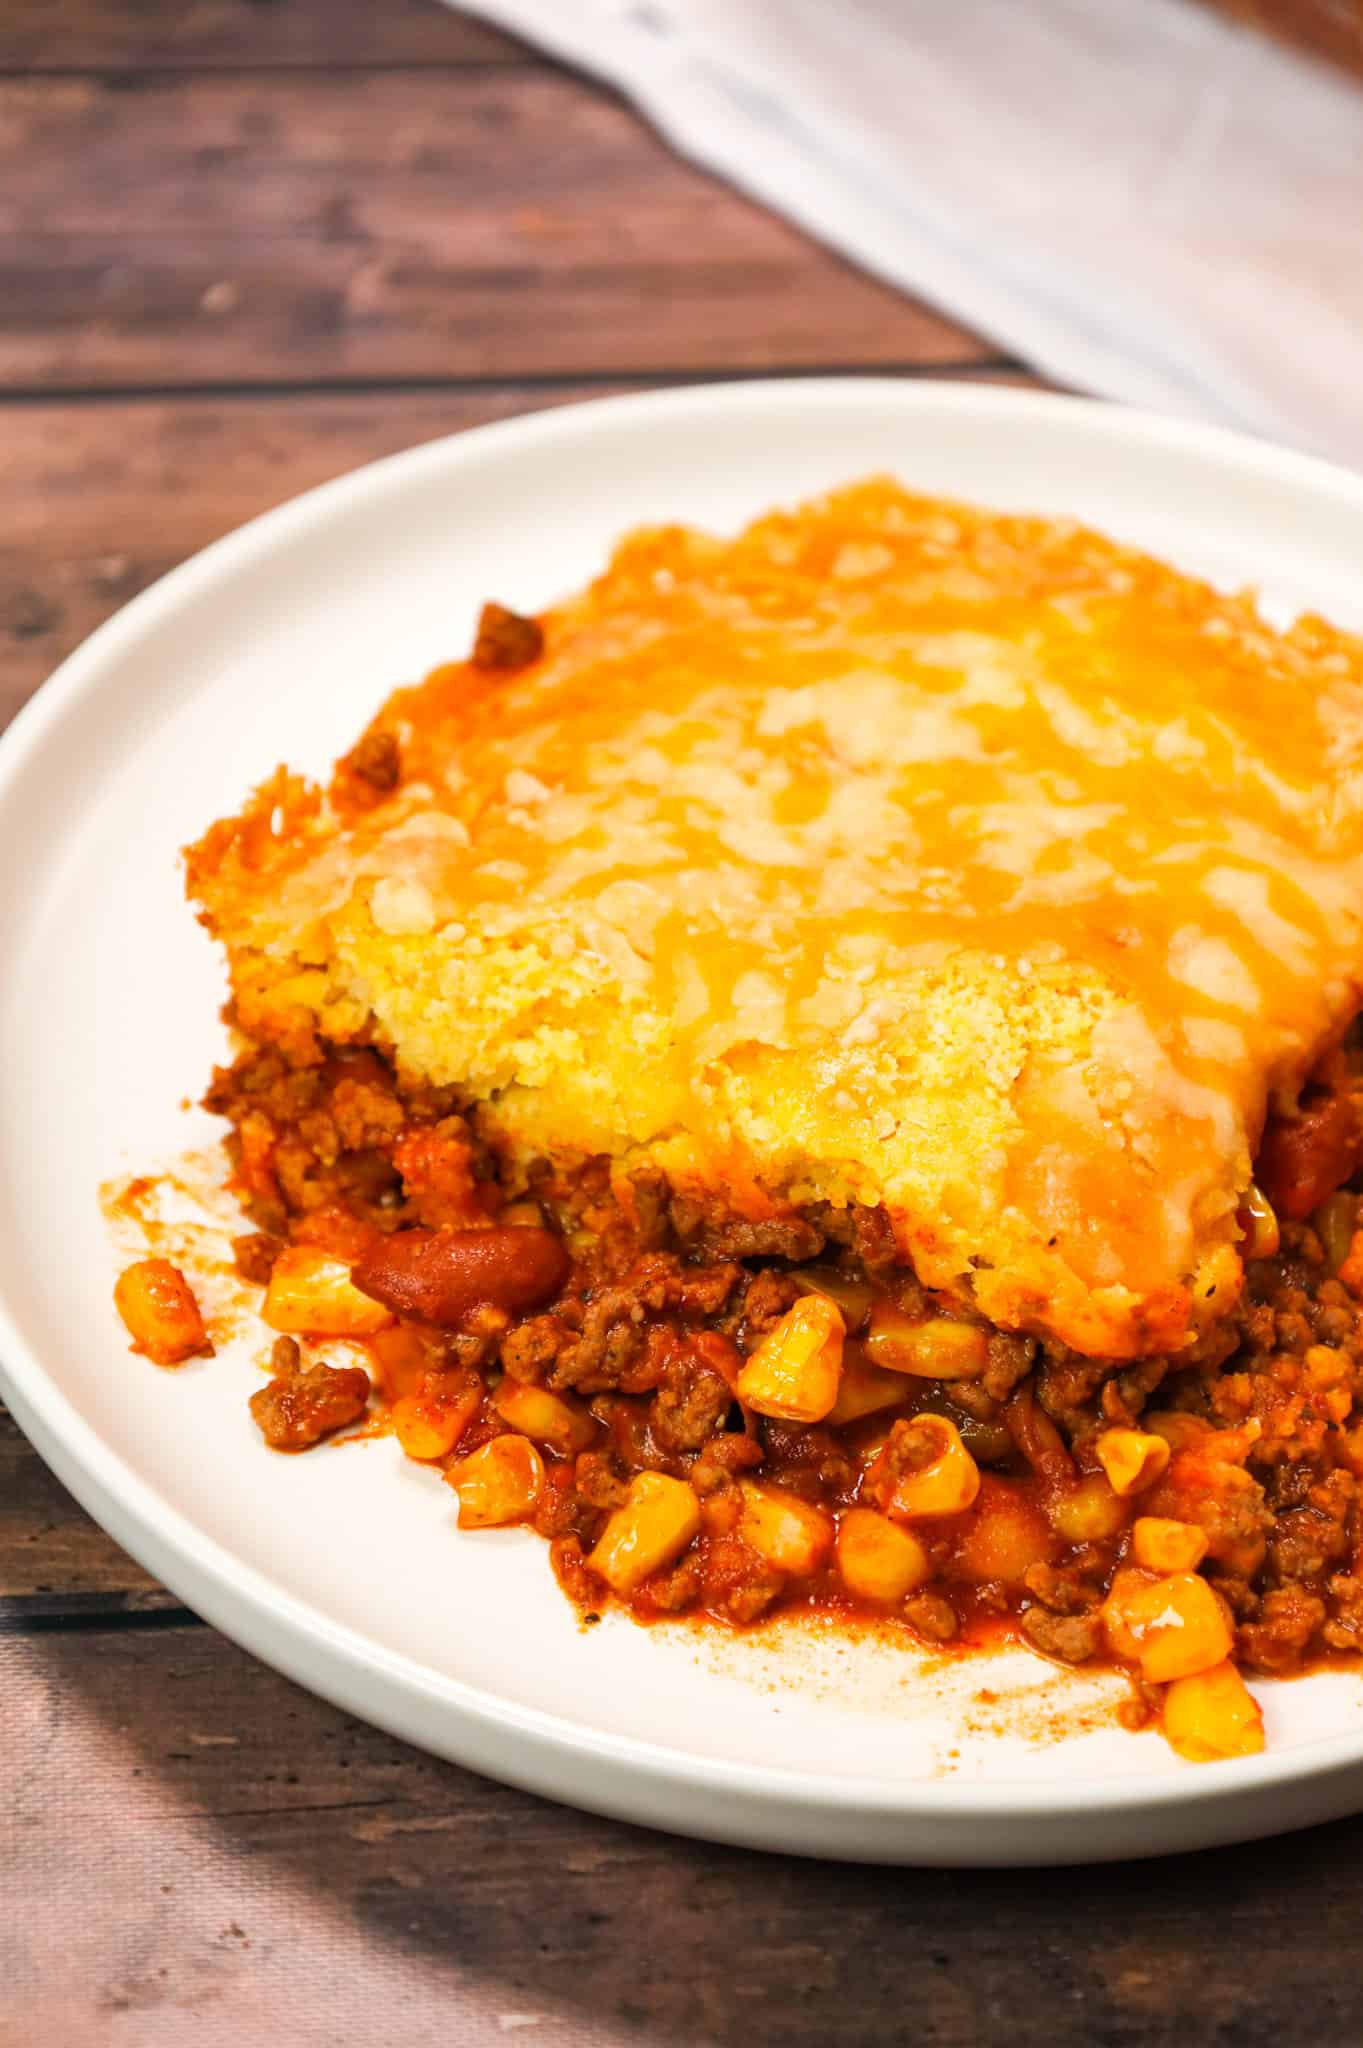 Chili Cornbread Casserole is an easy ground beef dinner recipe loaded with salsa, mixed beans, corn, chili seasoning and topped with cornbread and shredded cheese.